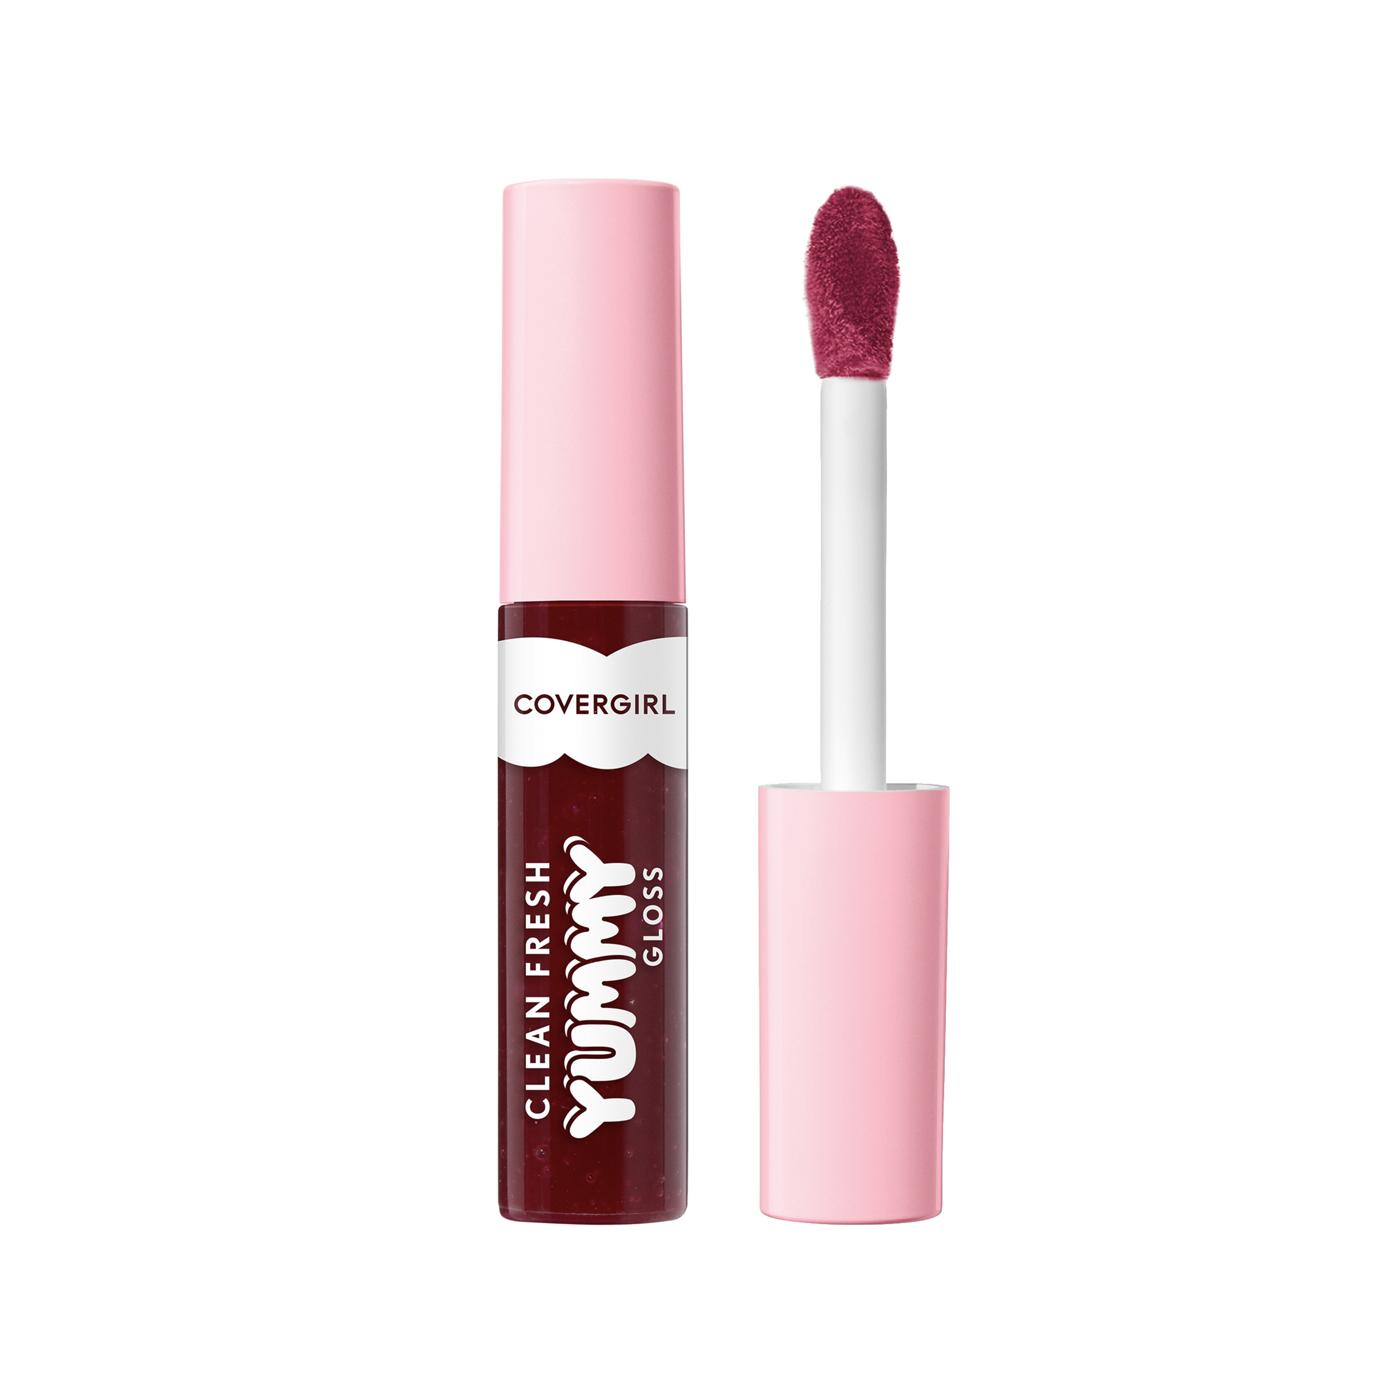 Covergirl Clean Fresh Yummy Lip Gloss - Acai You Later; image 1 of 4